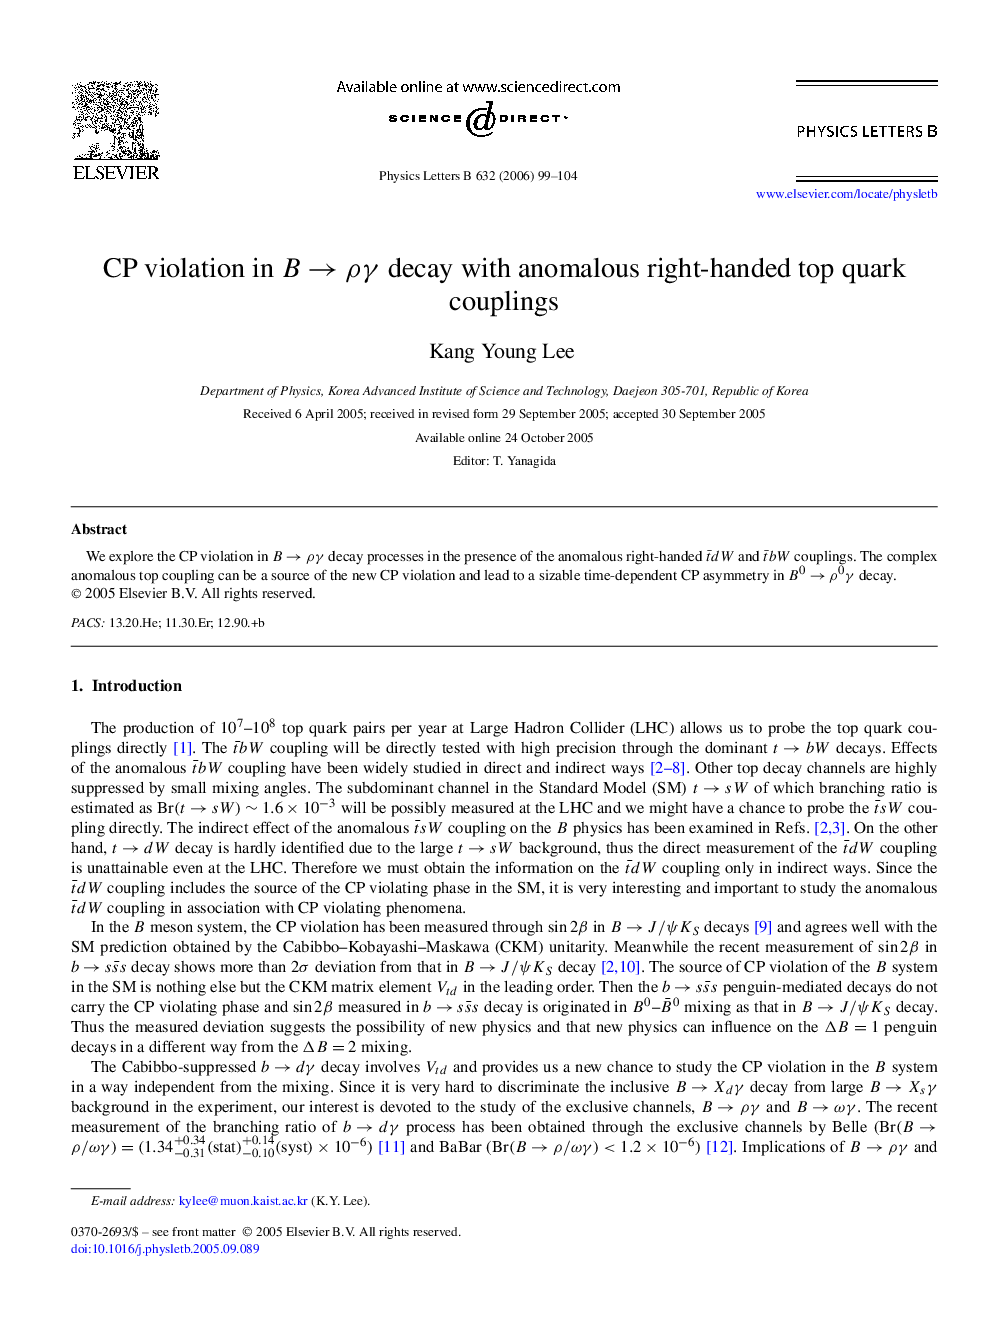 CP violation in BâÏÎ³ decay with anomalous right-handed top quark couplings